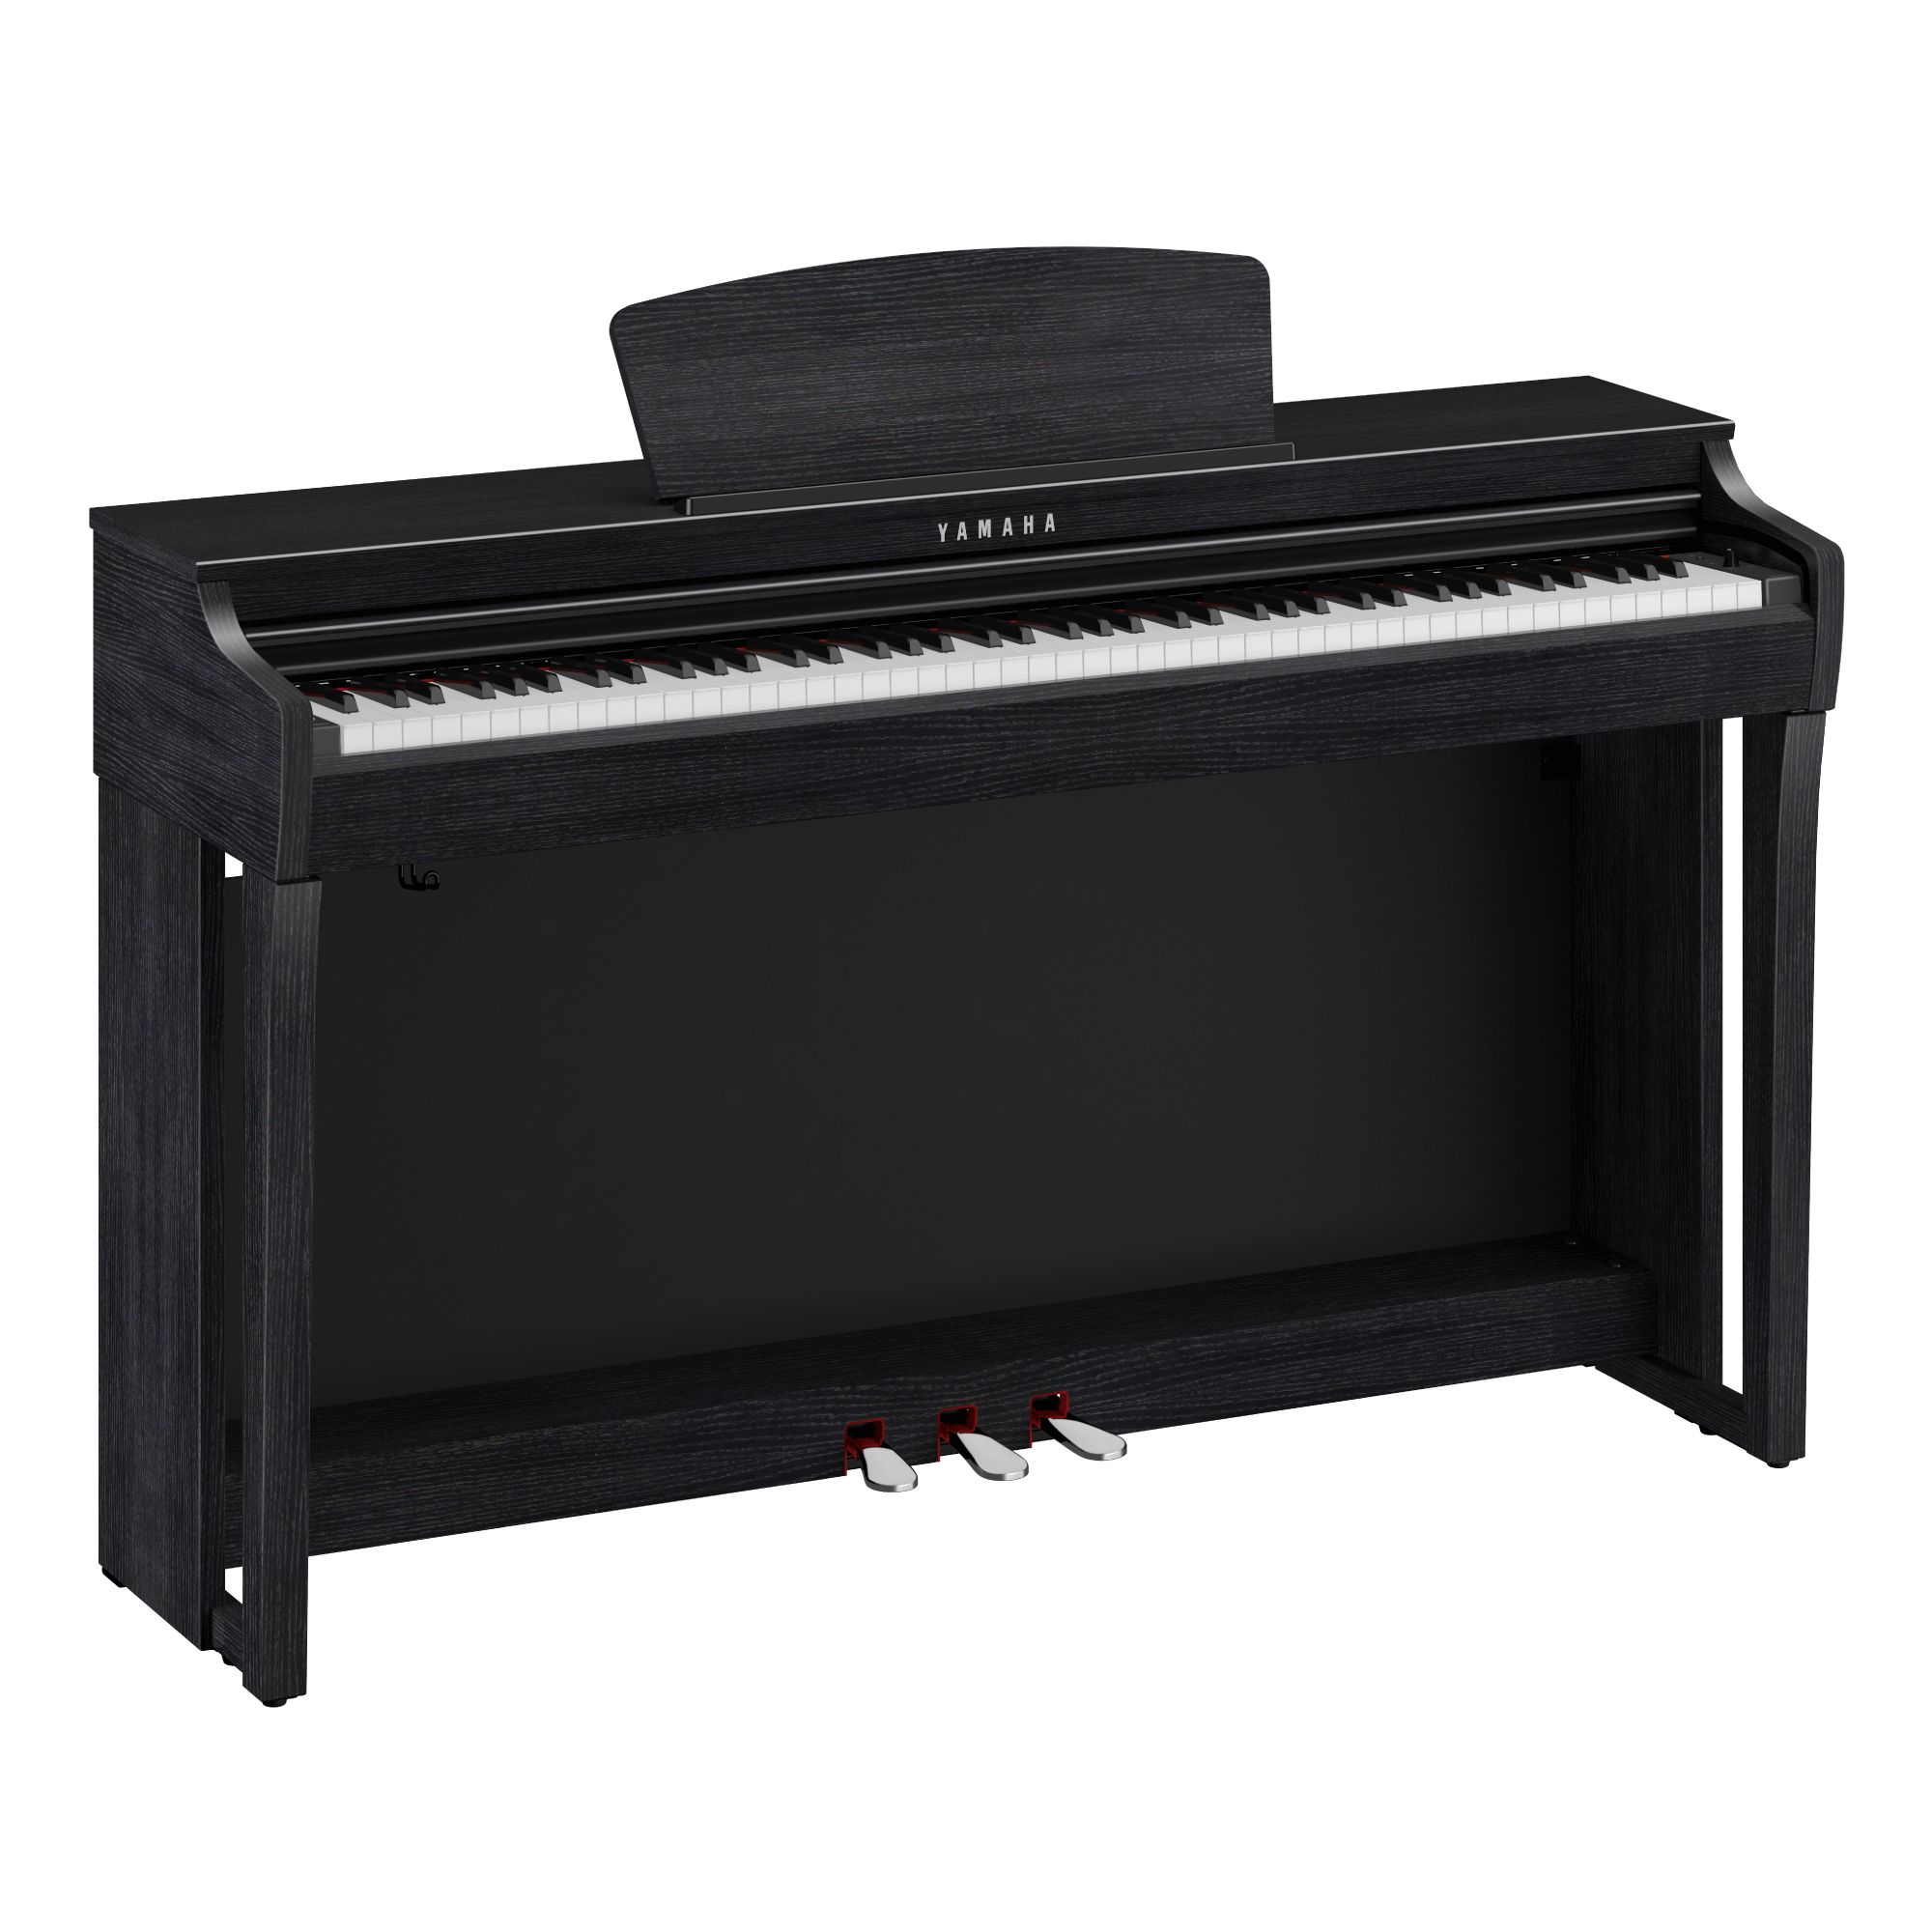 YDP-145 - Overview - ARIUS - Pianos - Musical Instruments 